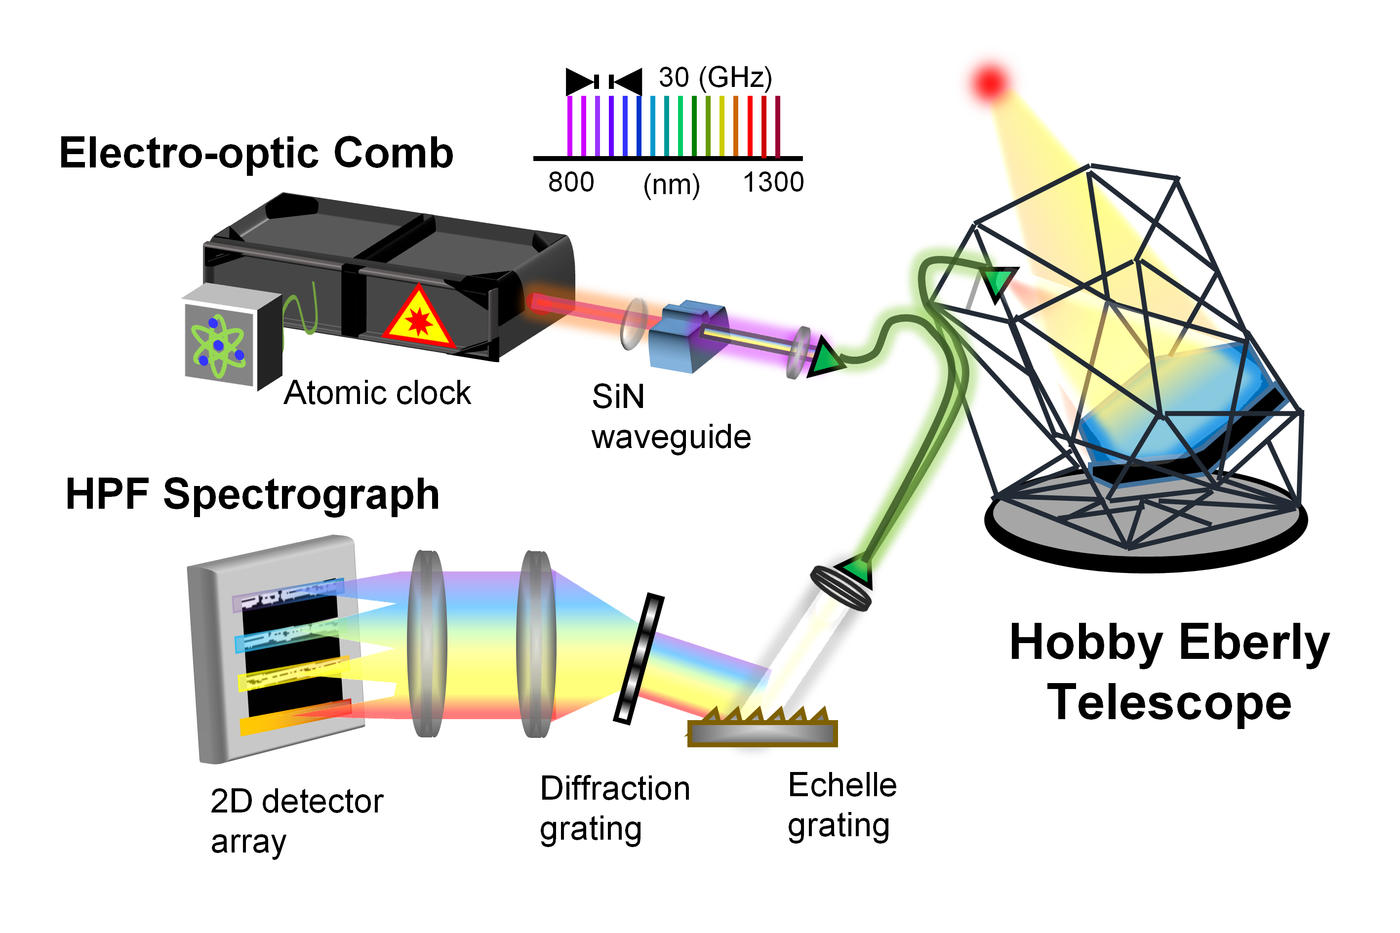 illustration of the different components of the astrocomb setup, including the telescope, electro-optic comb, and spectrograph.